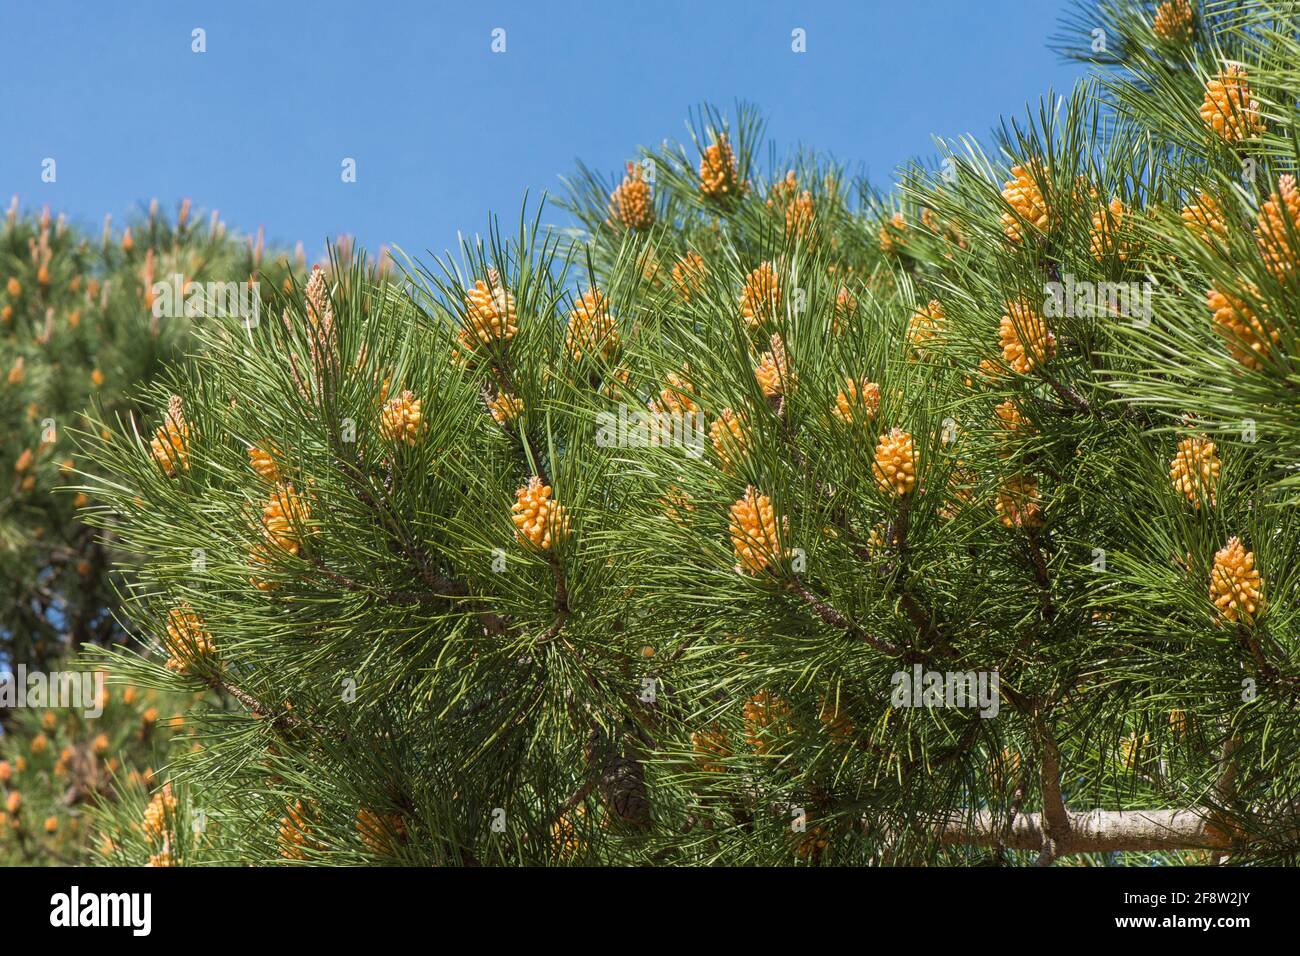 Immature male cones of  Pinus halepensis, Aleppo pine, Spain, Europe. Stock Photo